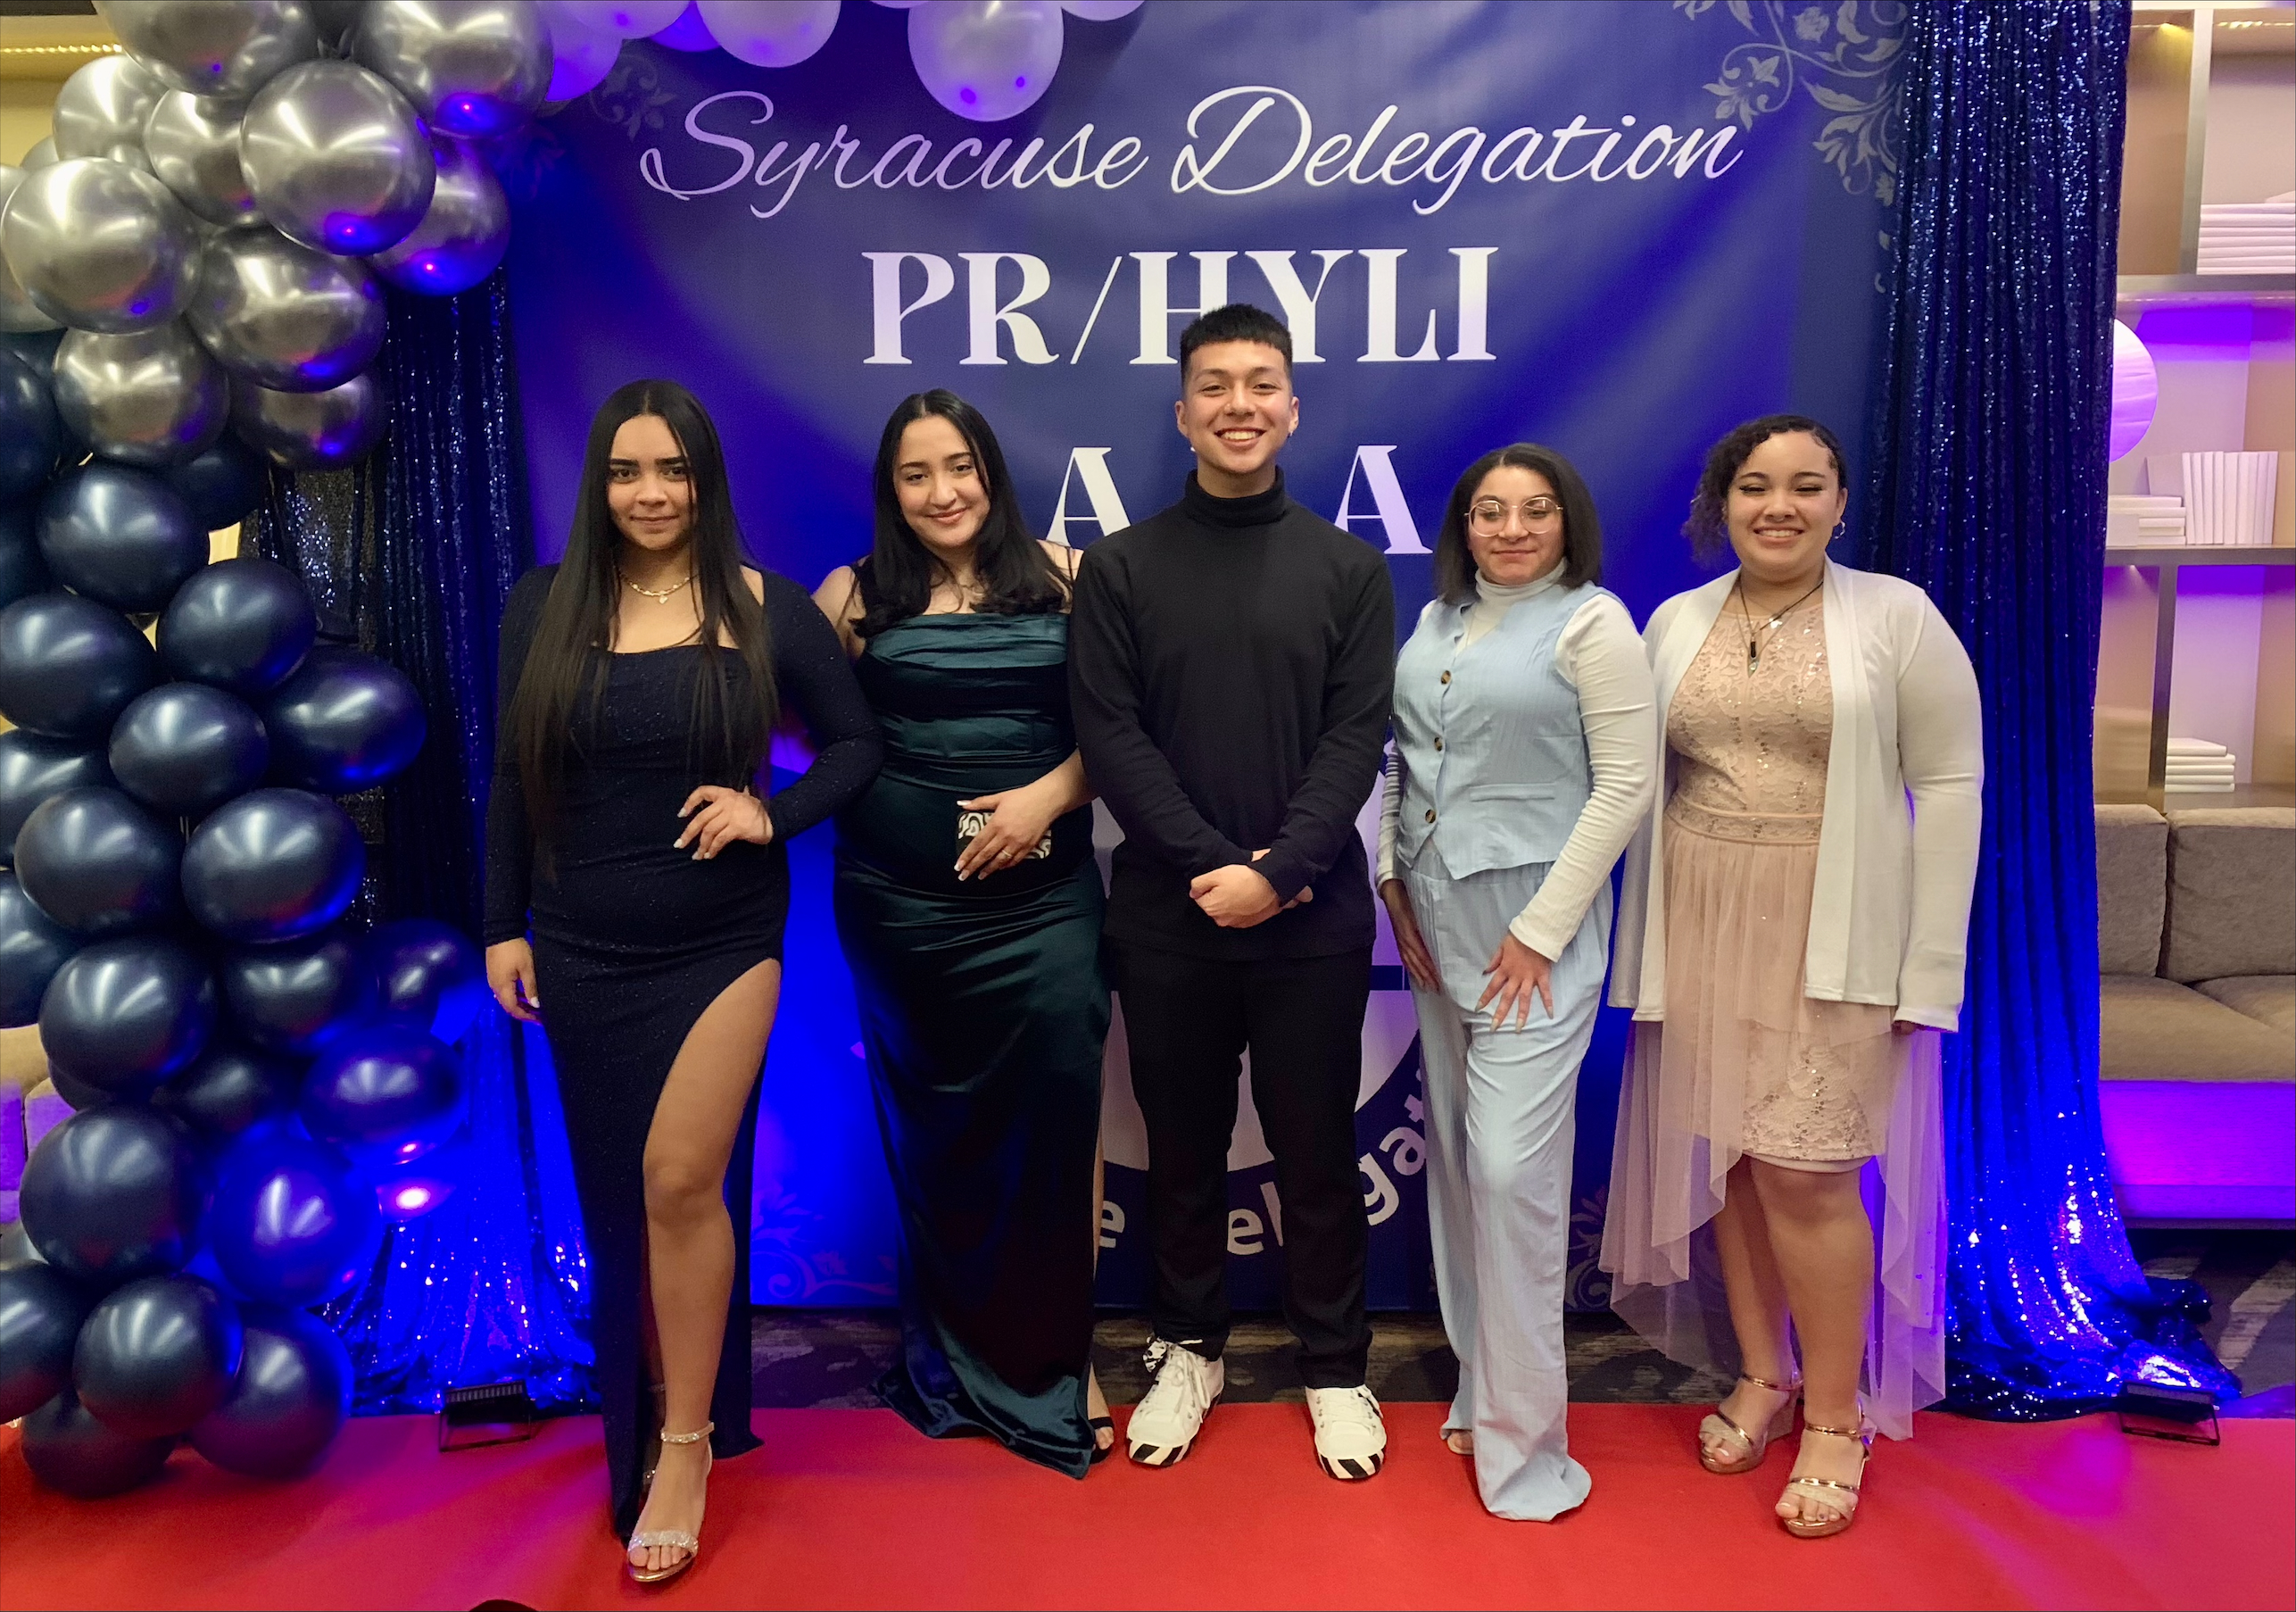 This is a photo of five SCSD students who attended the PRHYLI, standing in front of a balloon arch dressed up and smiling at the camera.